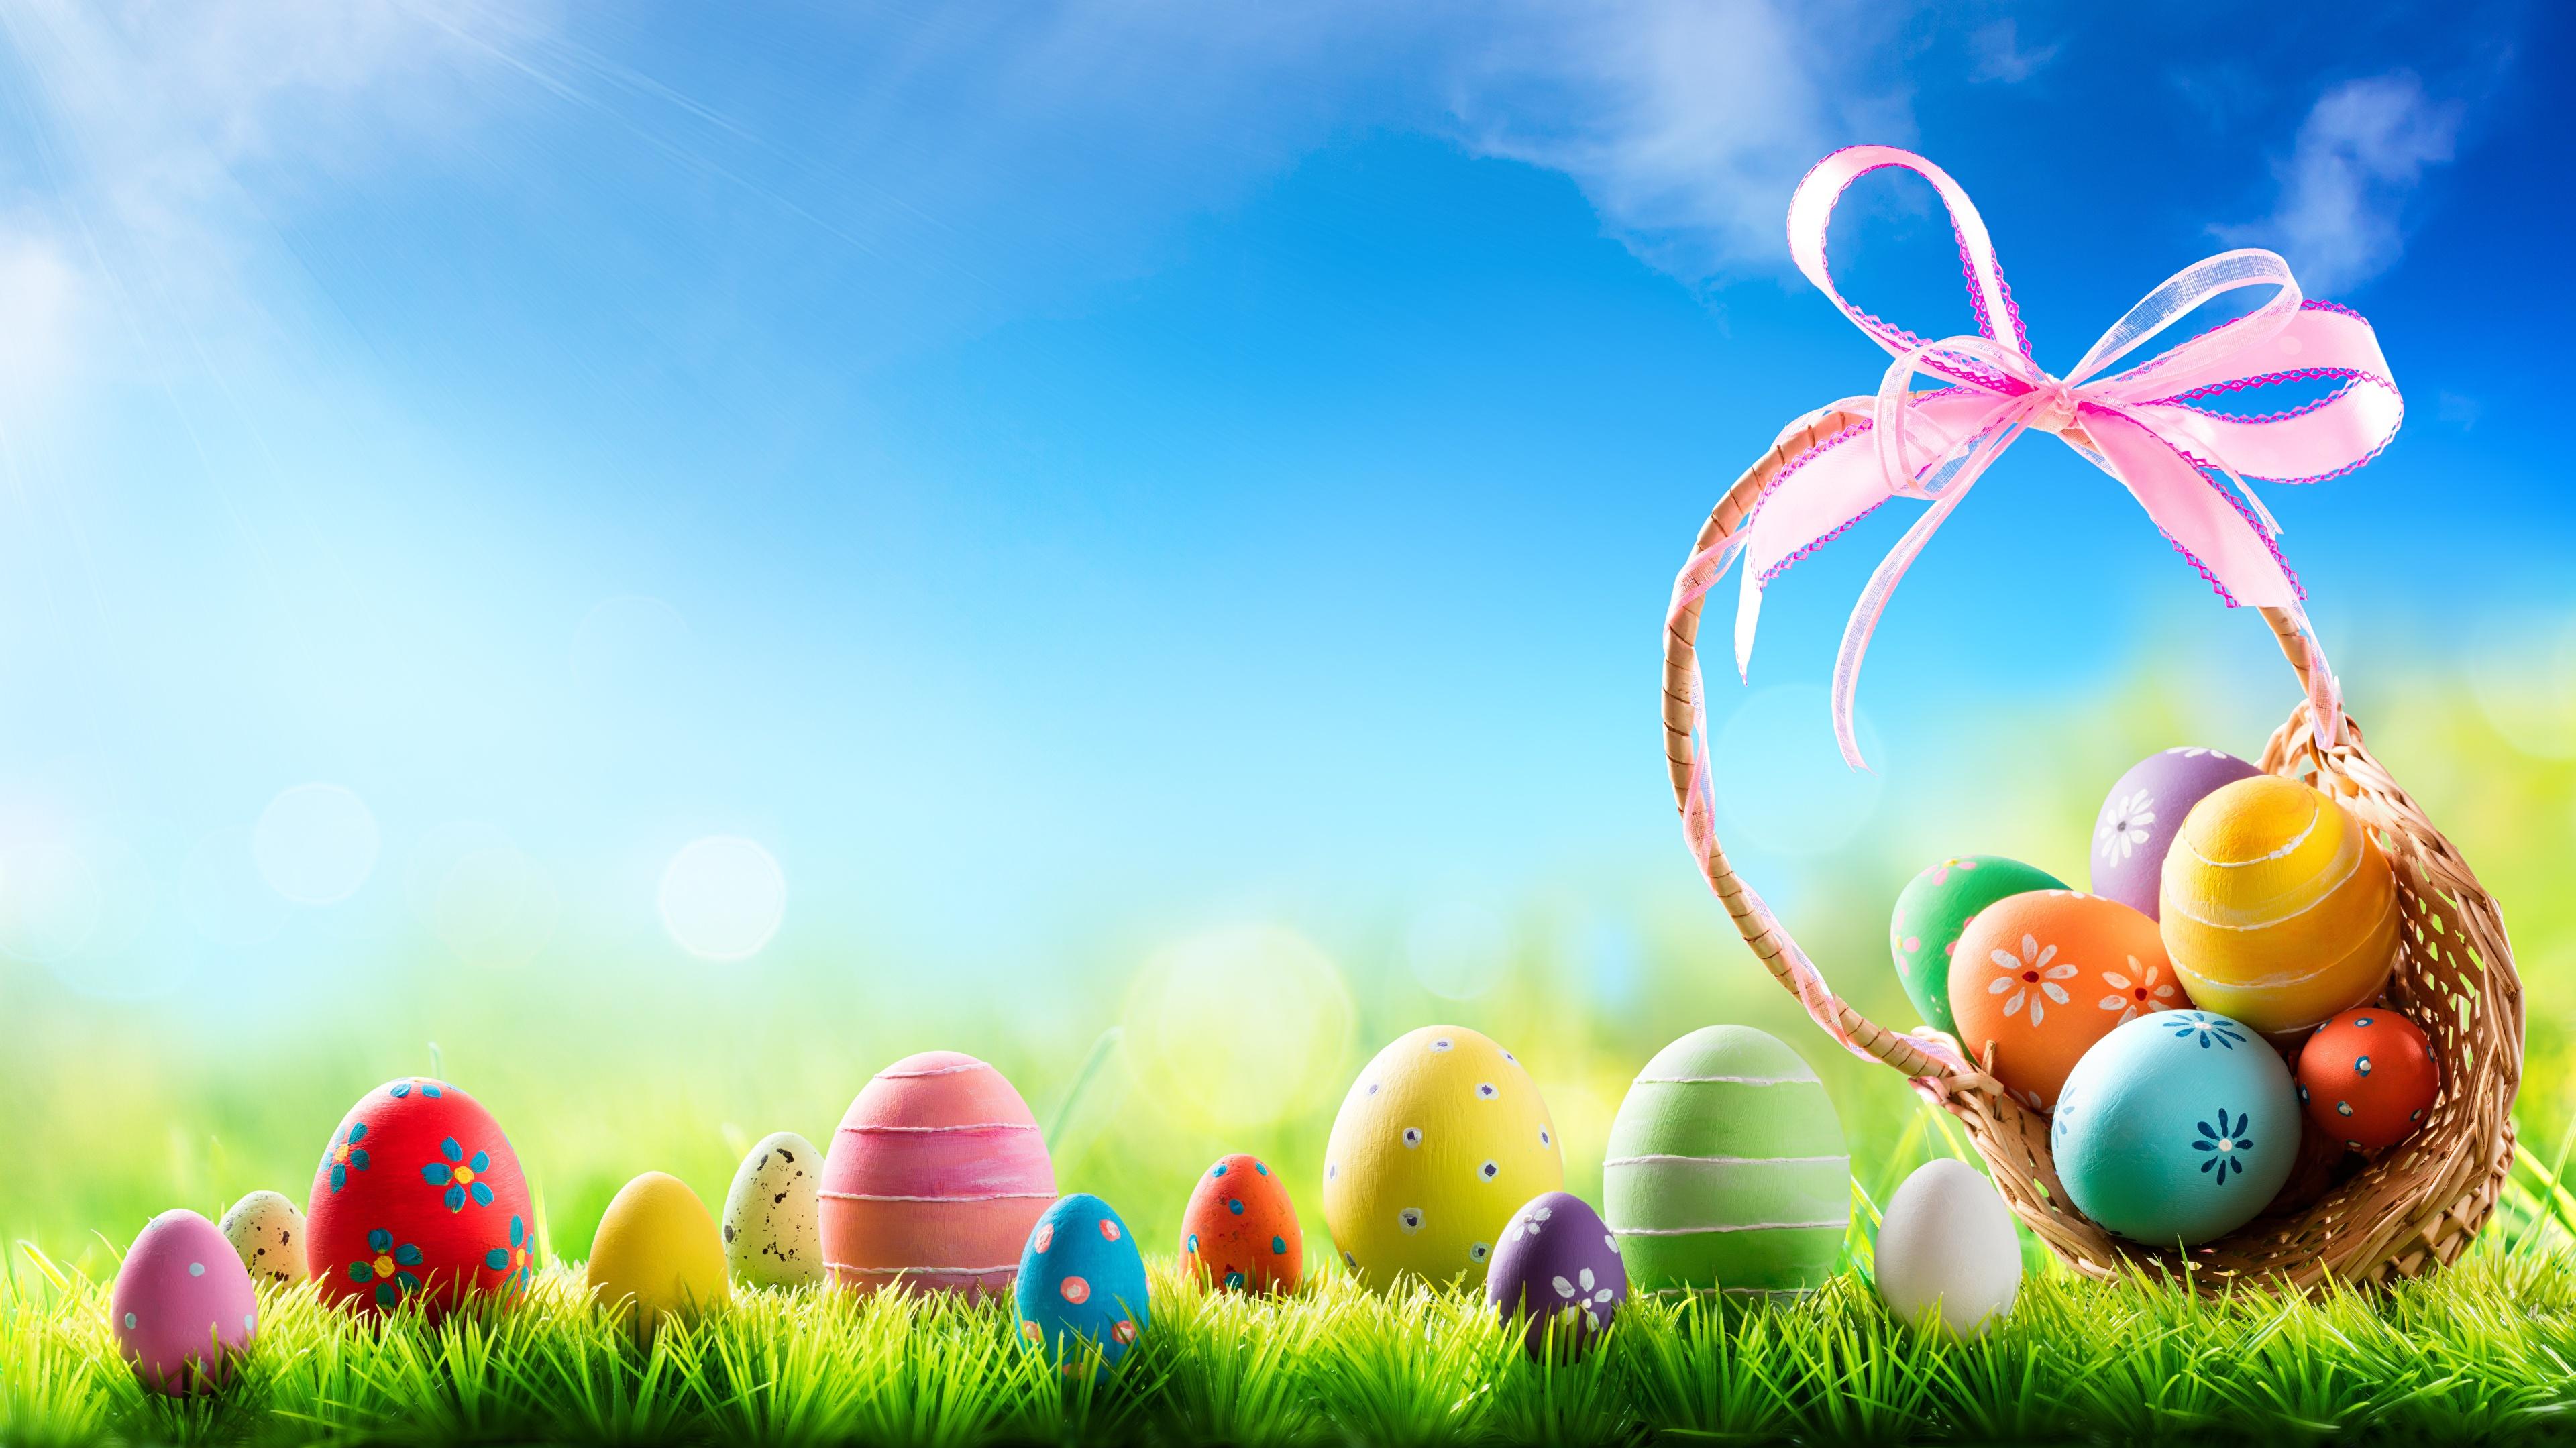 Pictures Easter Egg Wicker Basket Grass